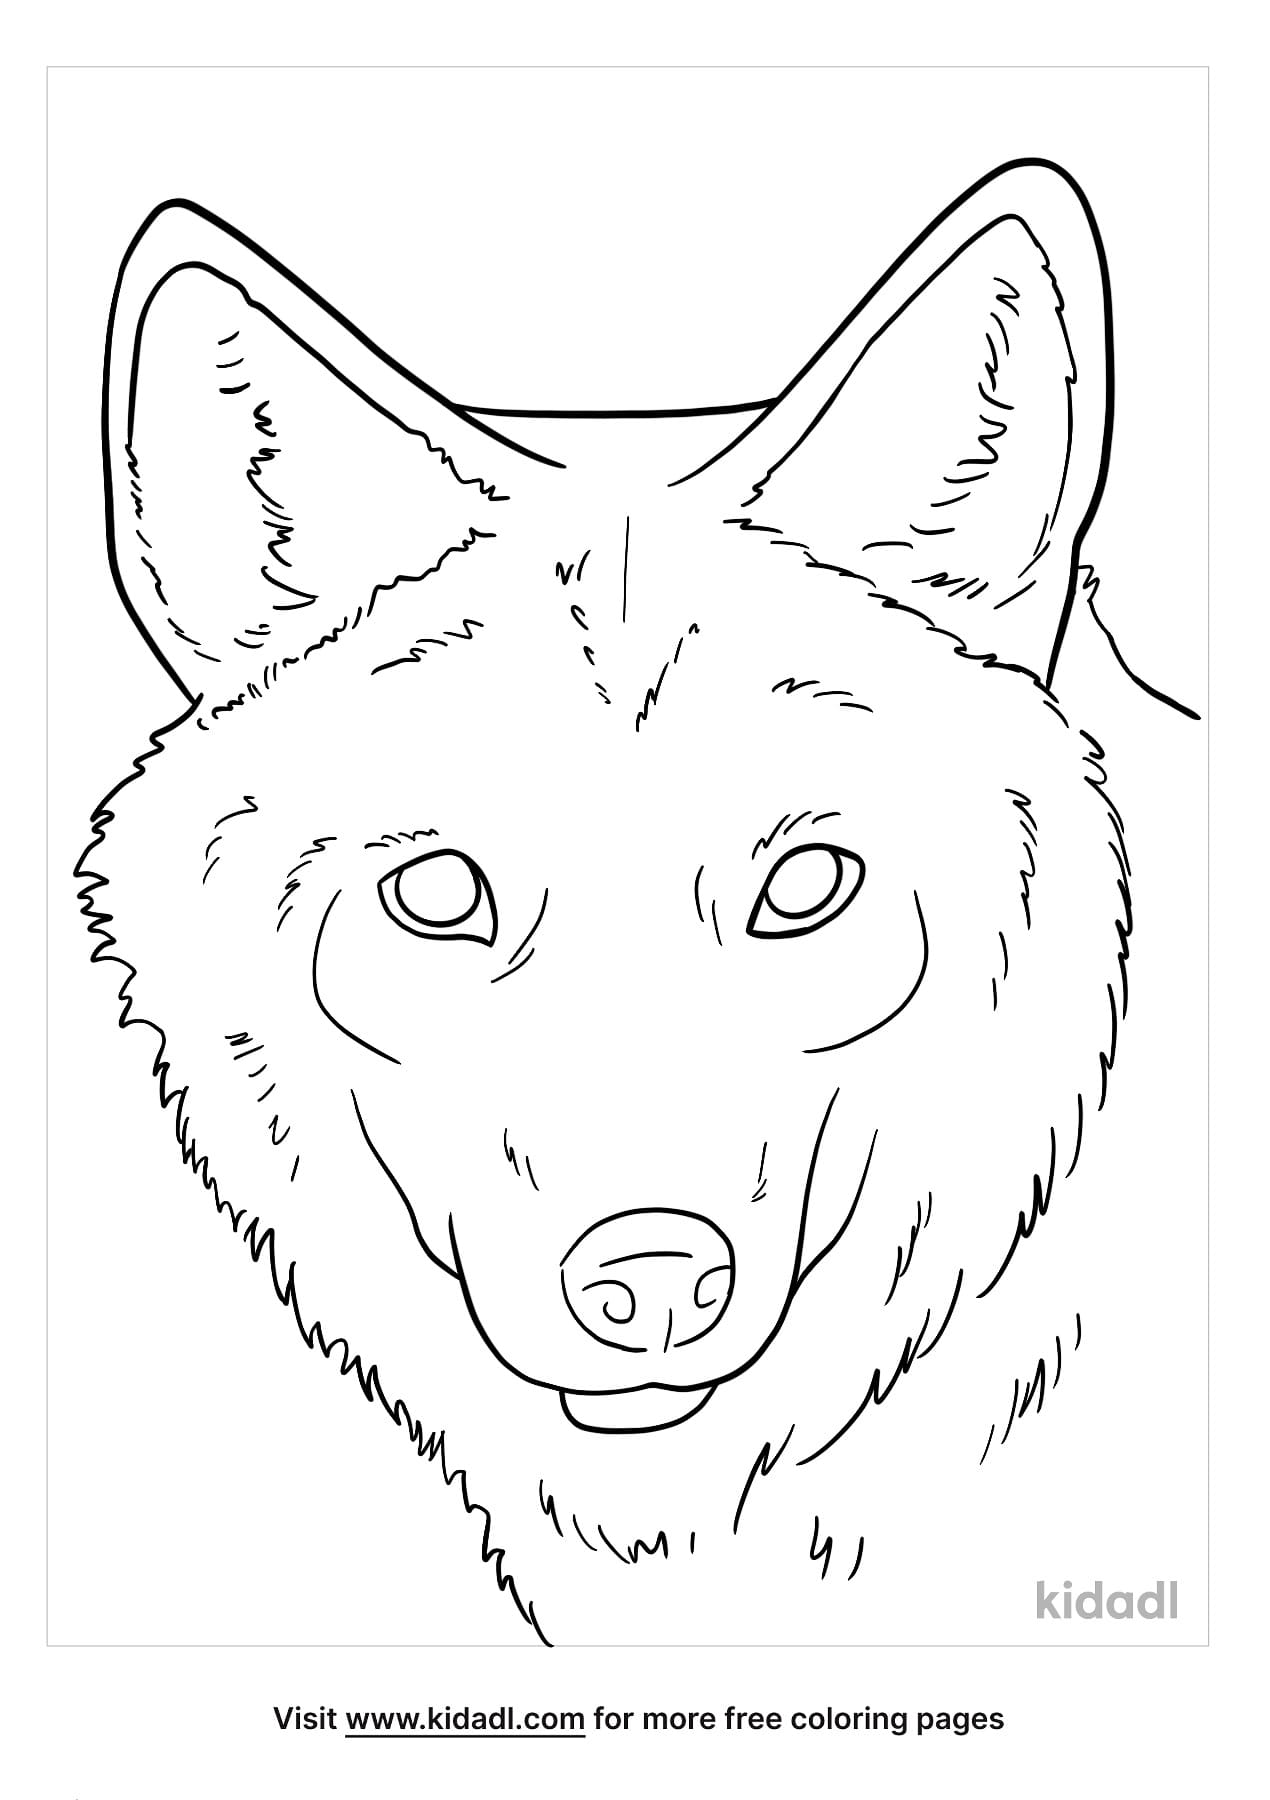 Coyote Face Image Coloring Page